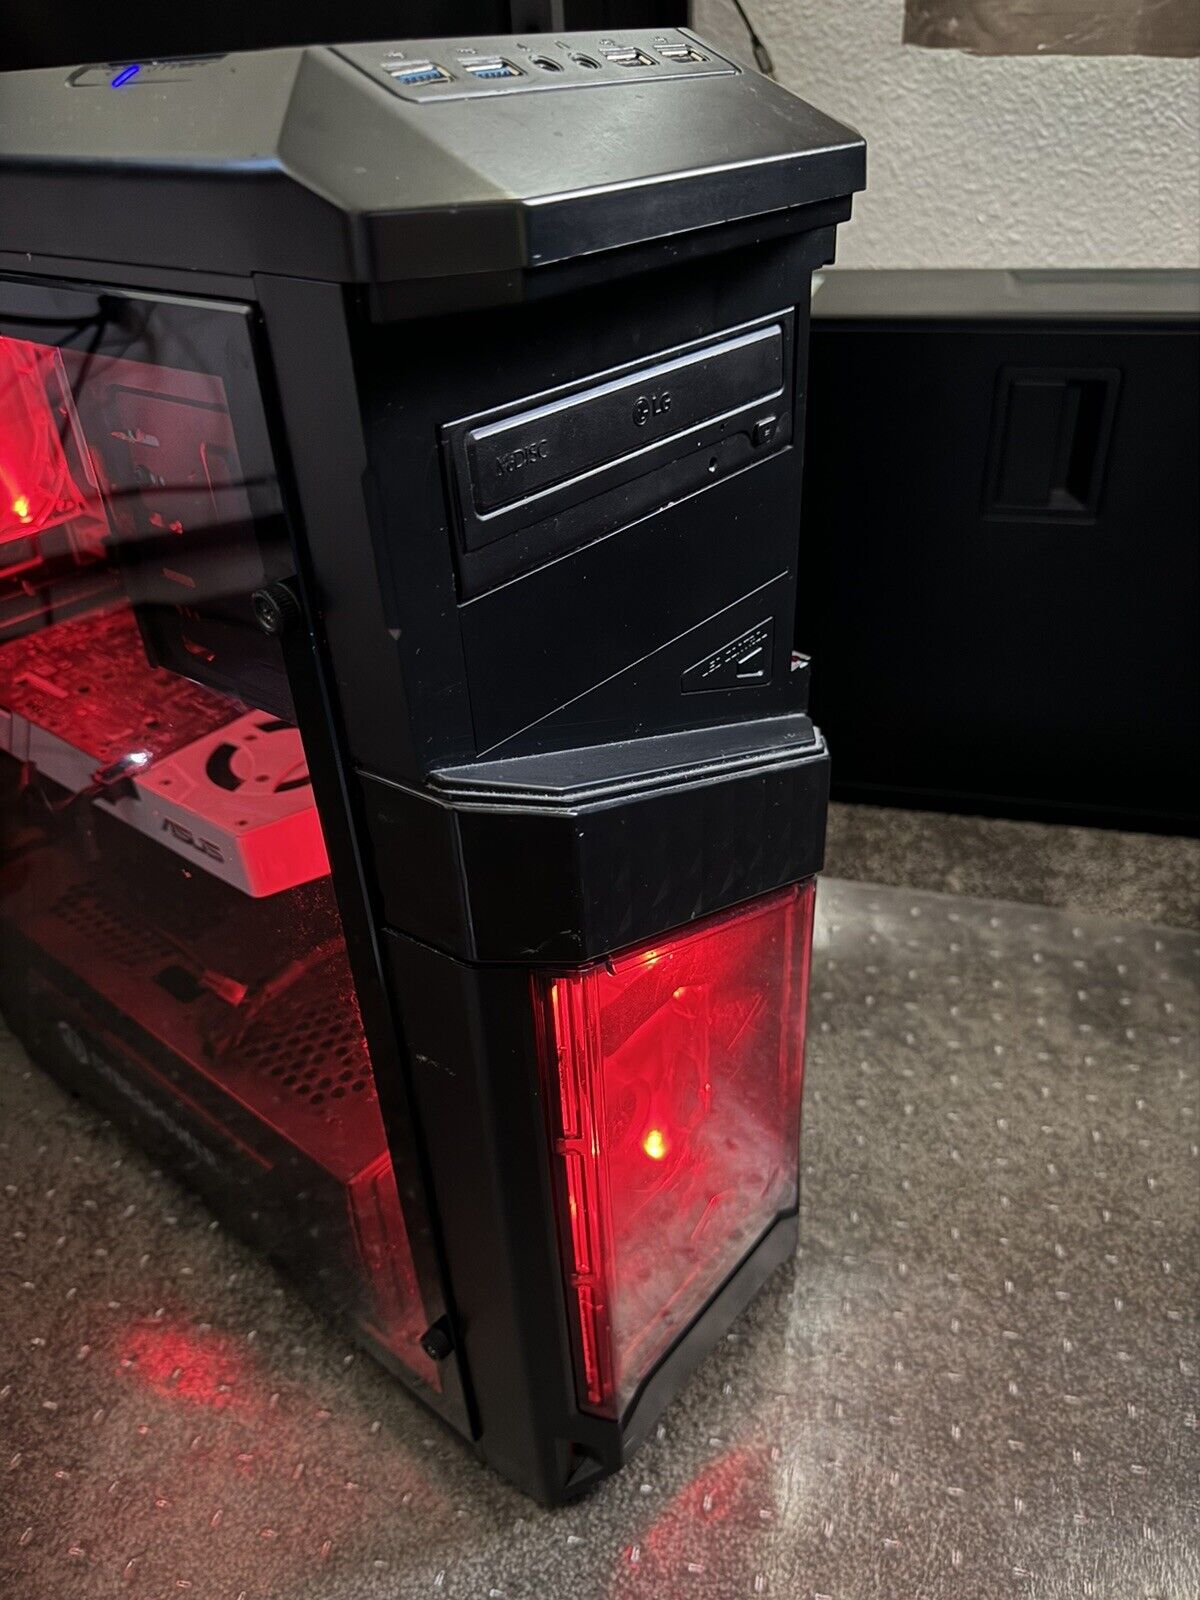 CyberPower Gaming PC